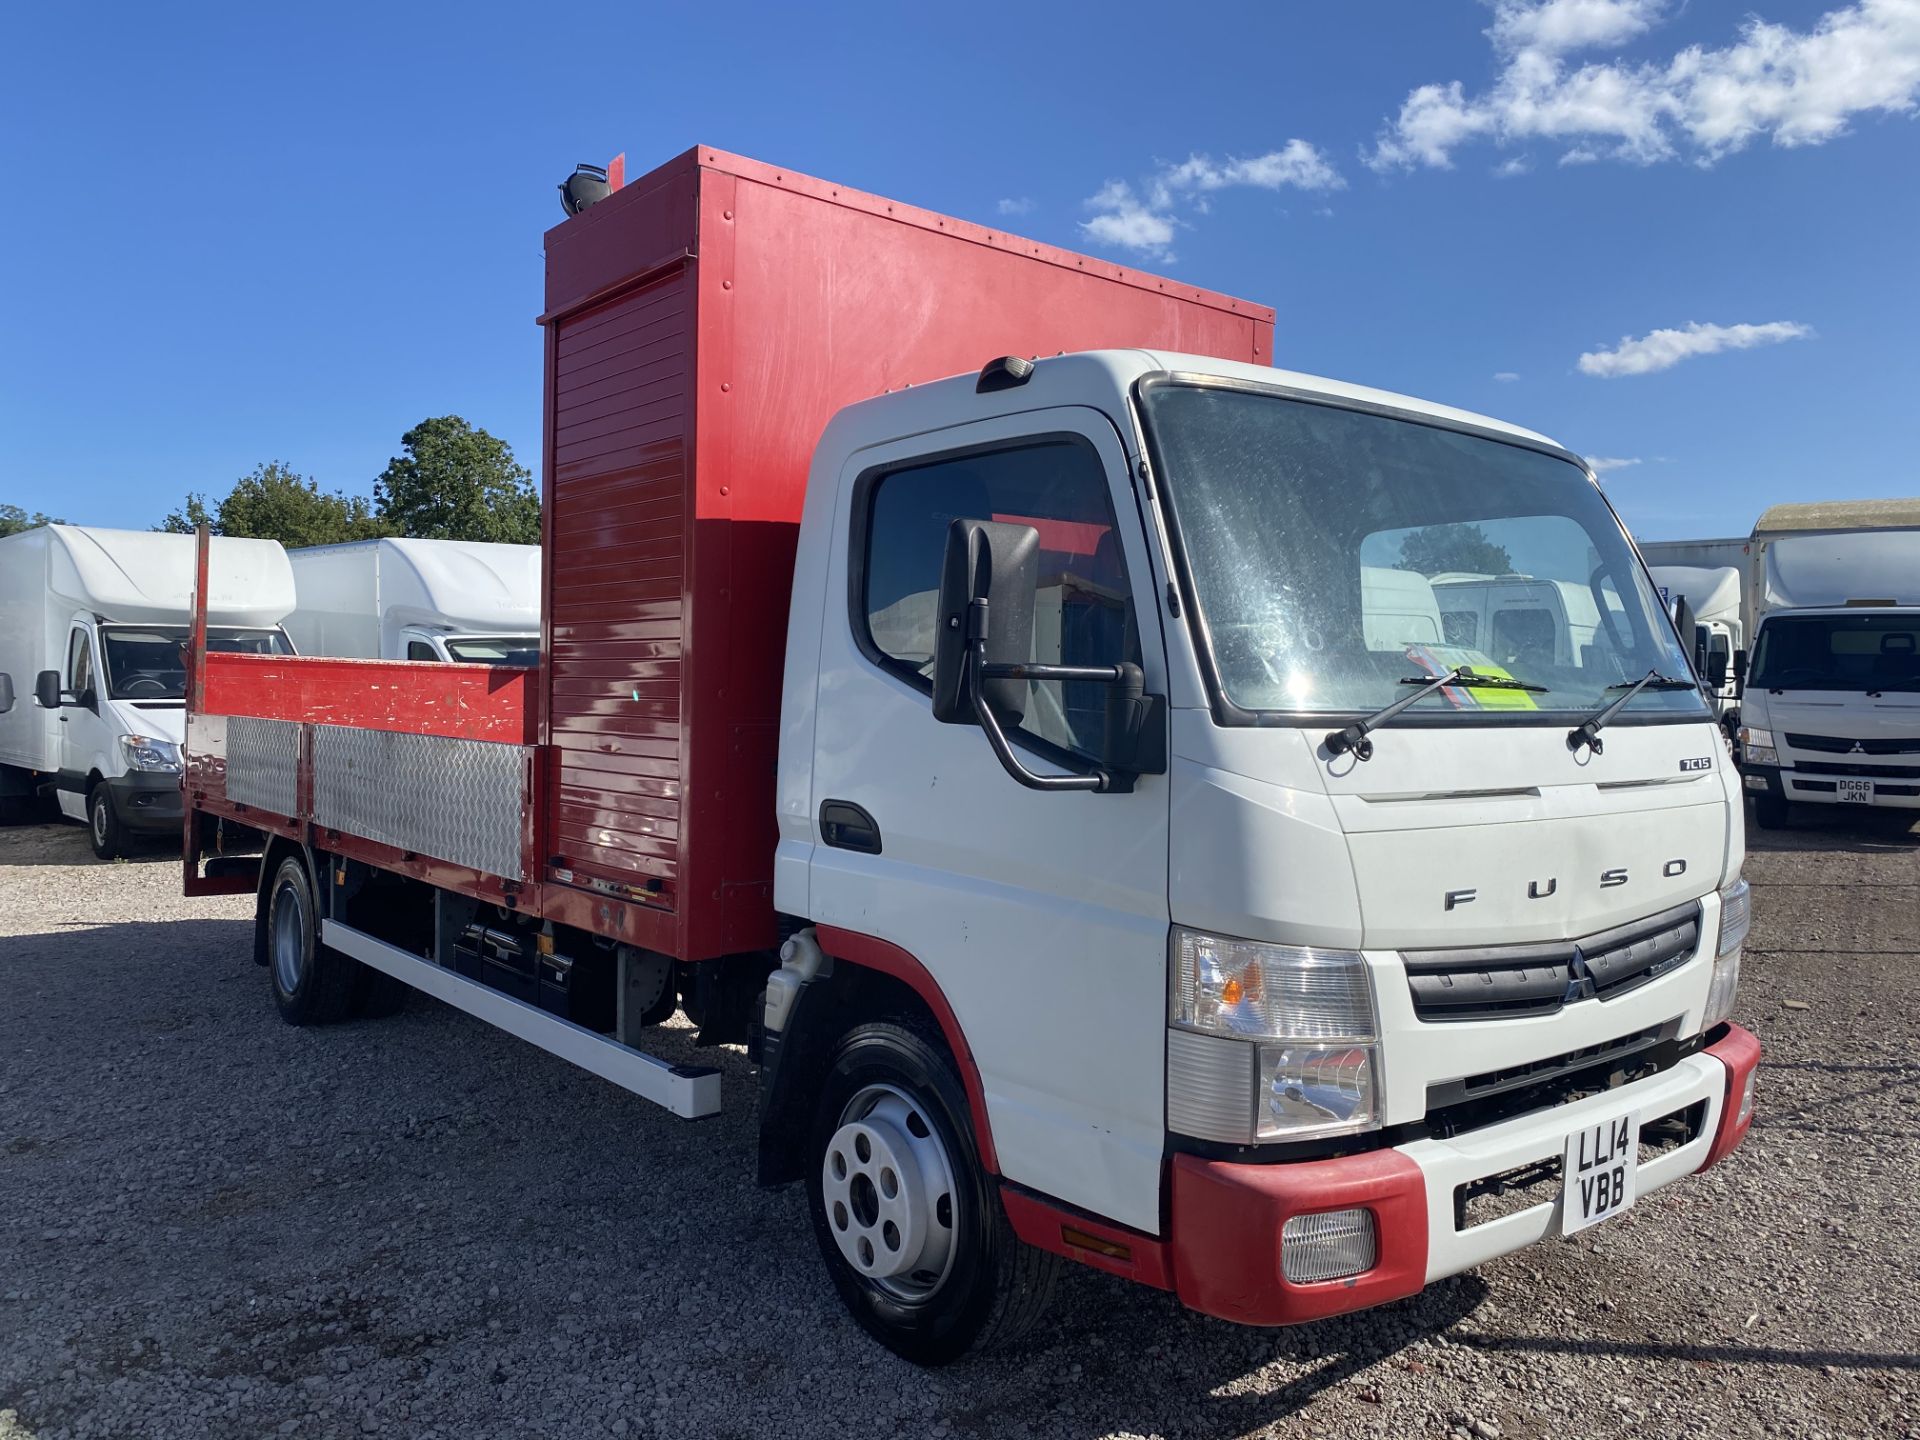 (ON SALE) MITSUBISHI CANTER 7C15 LWB DROPSIDE TRUCK - MANUAL GEARBOX - EURO 6 - 14 REG - 1 KEEPER -